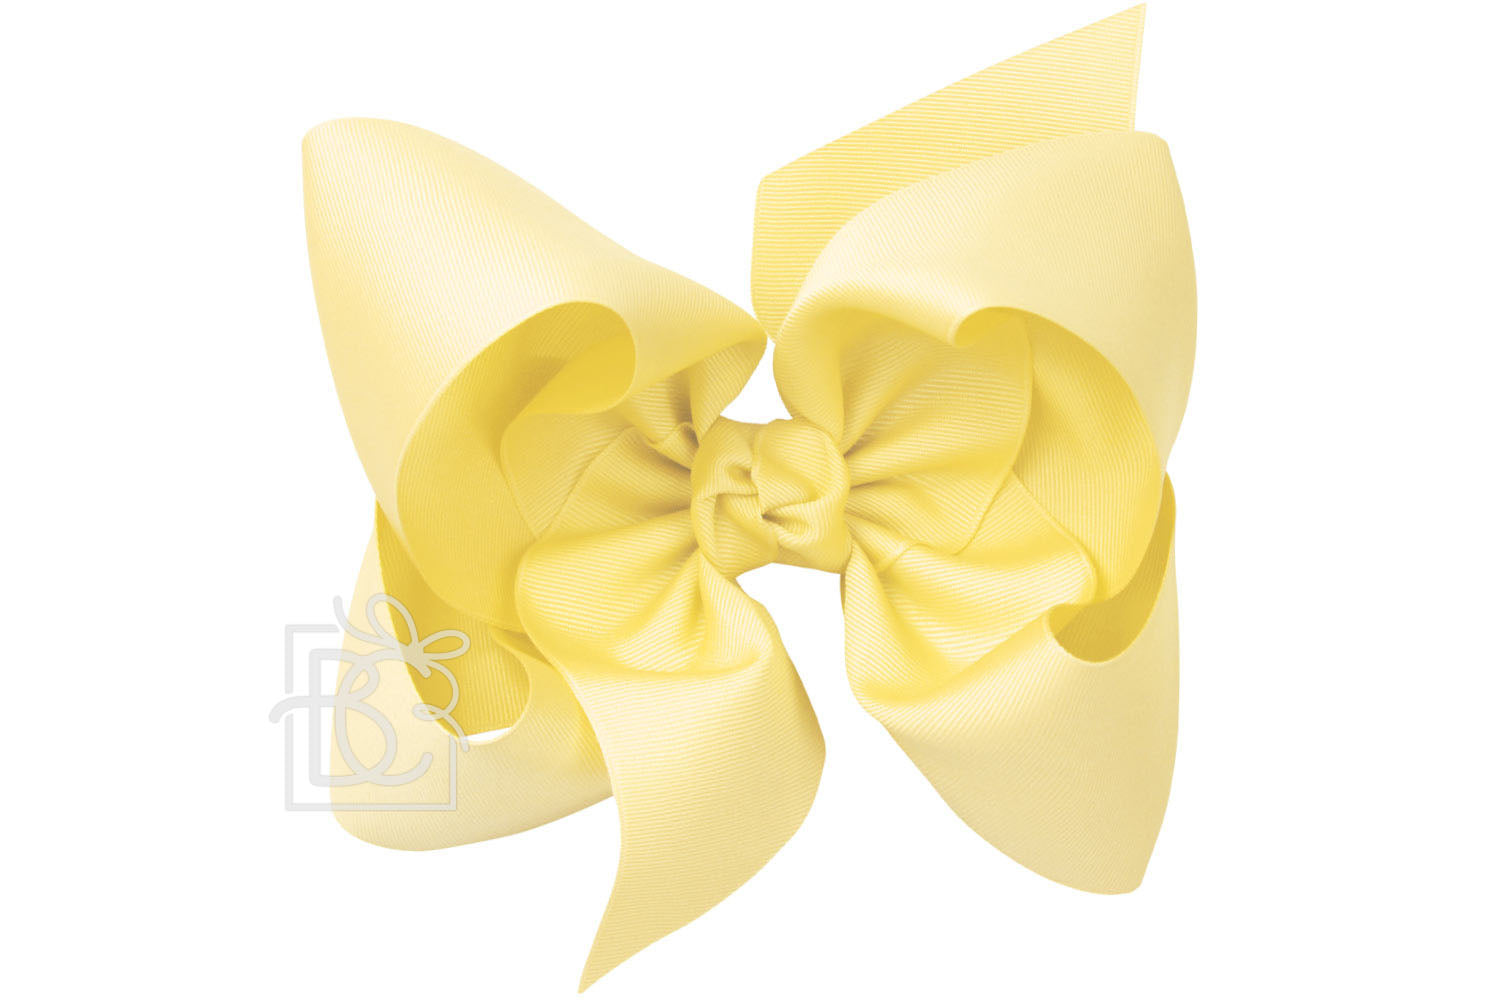 Texas Sized Bow in Light Yellow  - Doodlebug's Children's Boutique